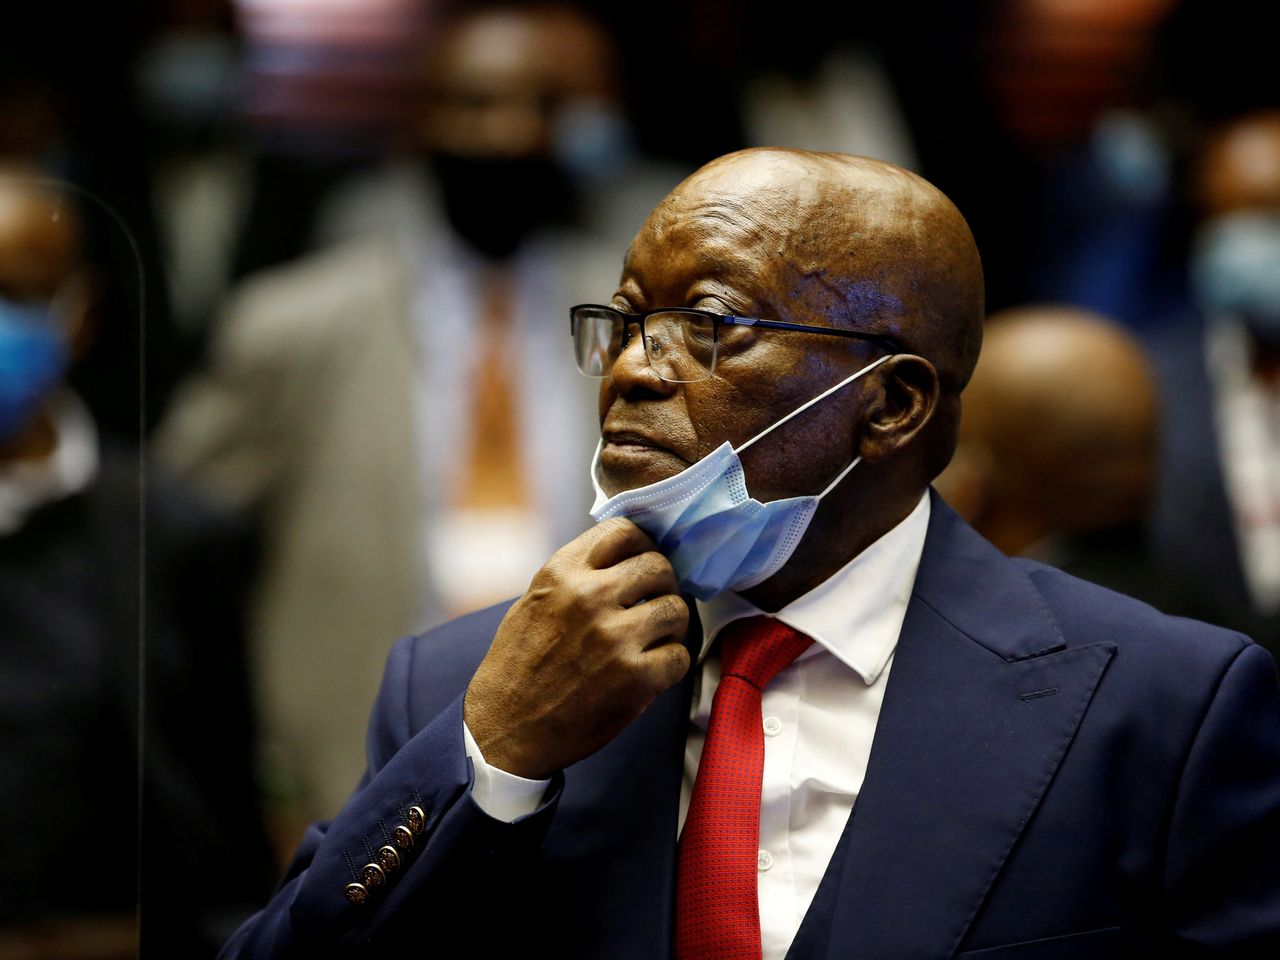 Zuma, Ex-South African President, Sent To Prison